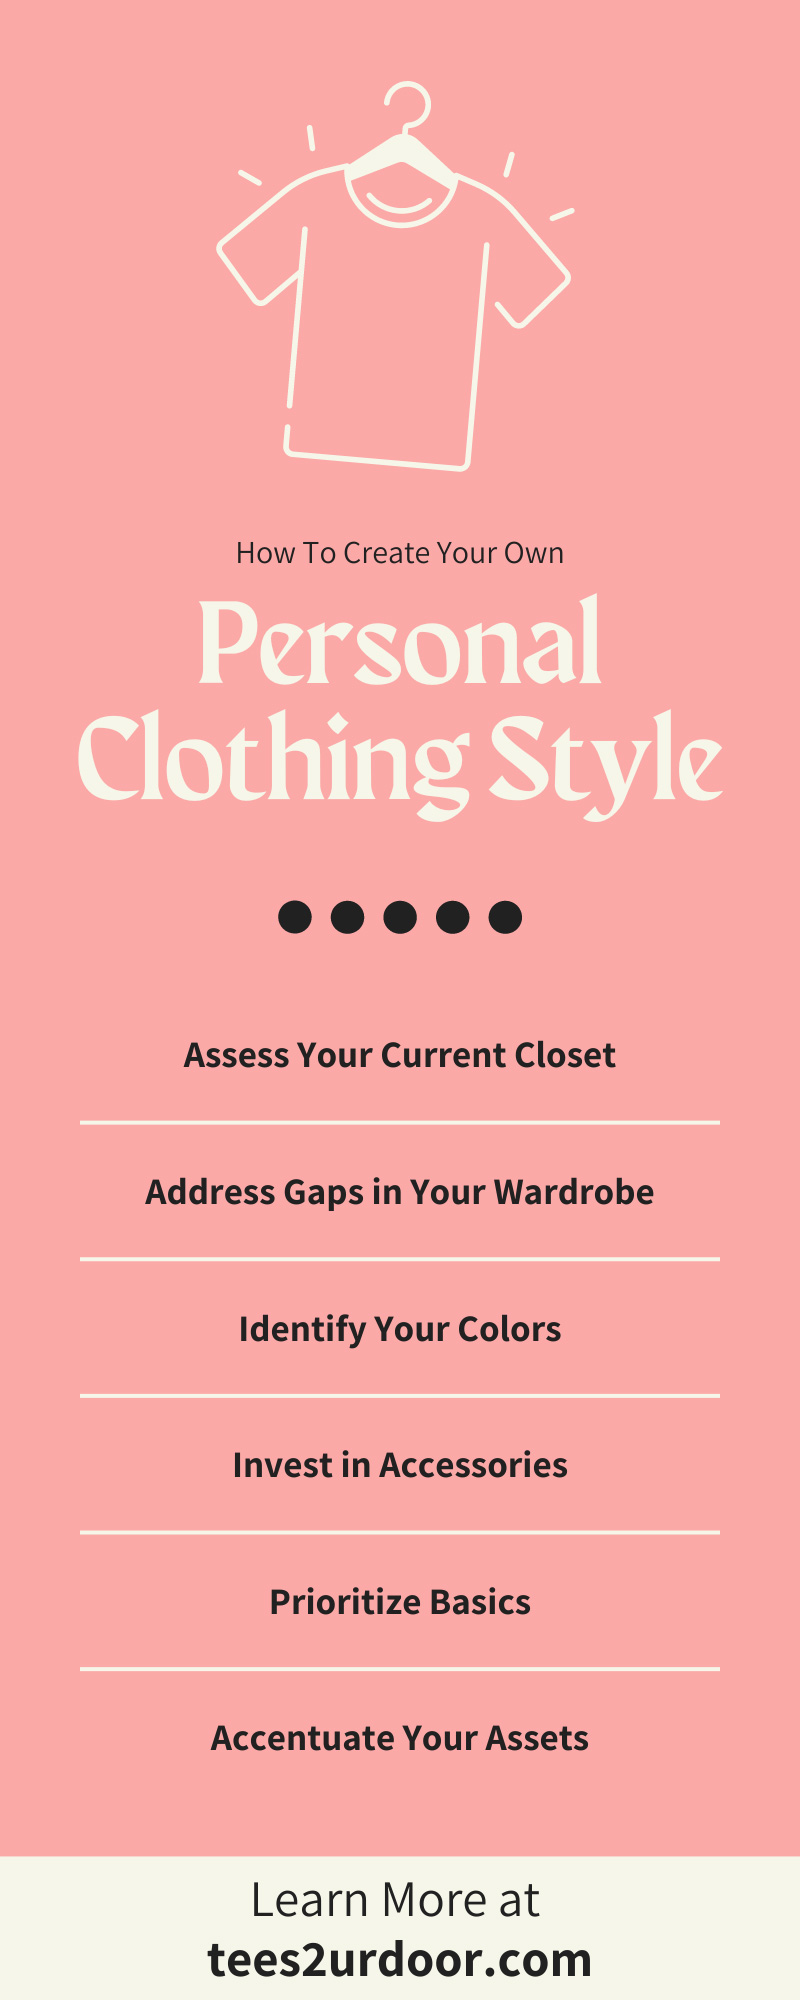 How To Create Your Own Personal Clothing Style - Tees2urdoor